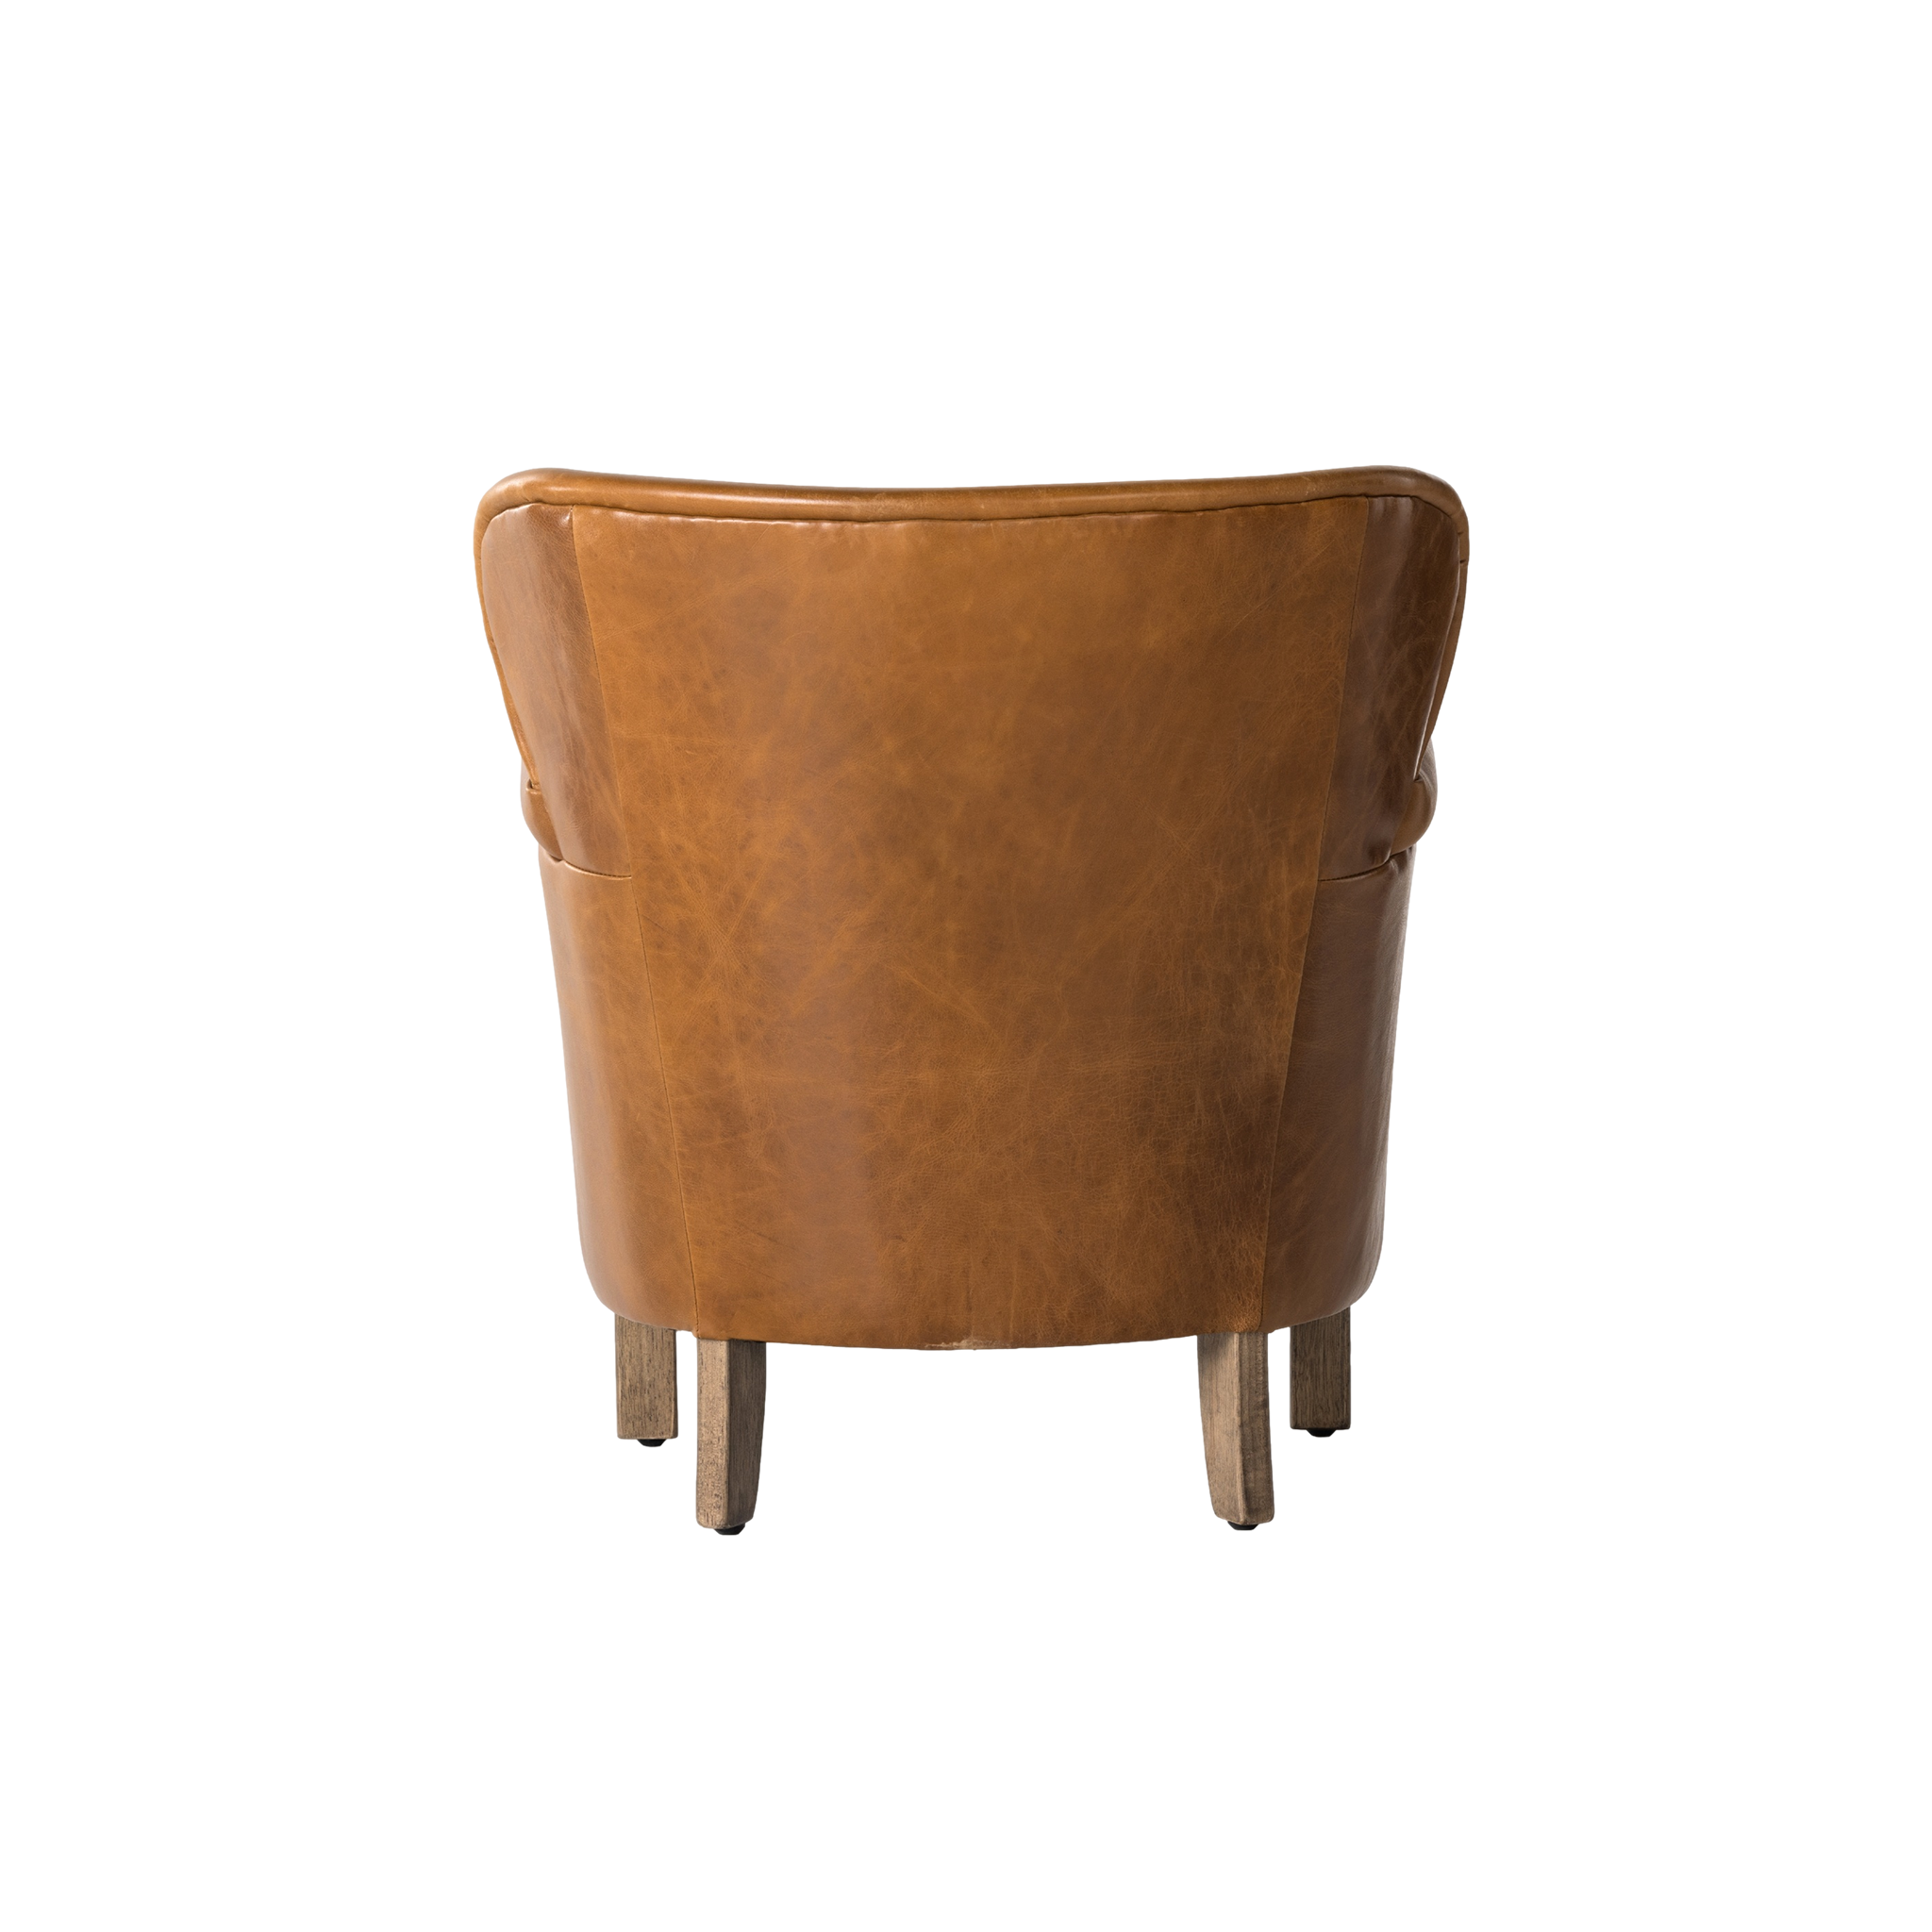 Wycliffe Chair in Soft Camel